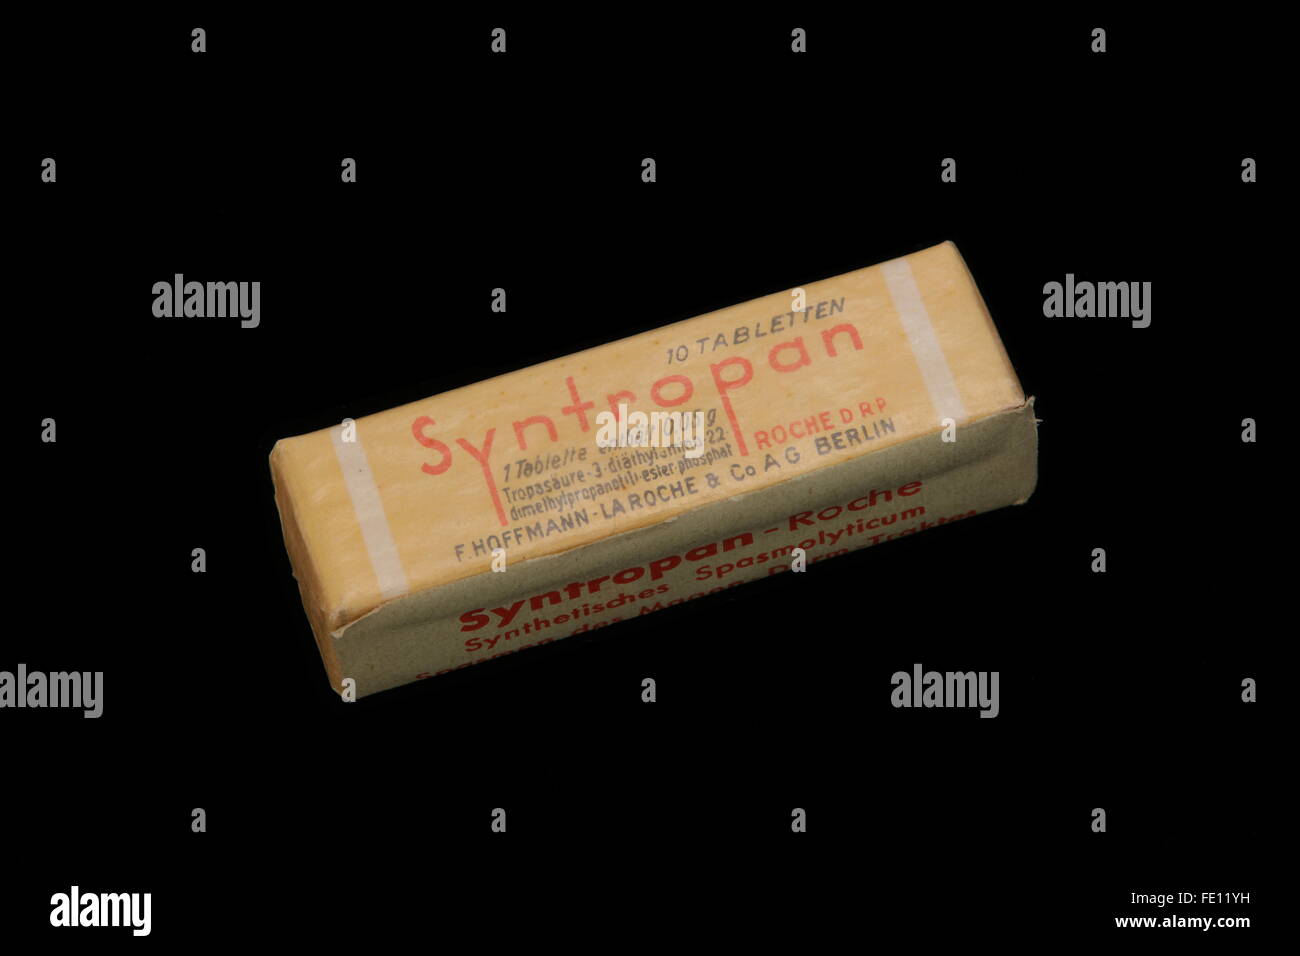 Historic German sample of Syntropan as given to German Doctors in late 18th early 19th century packaging Stock Photo